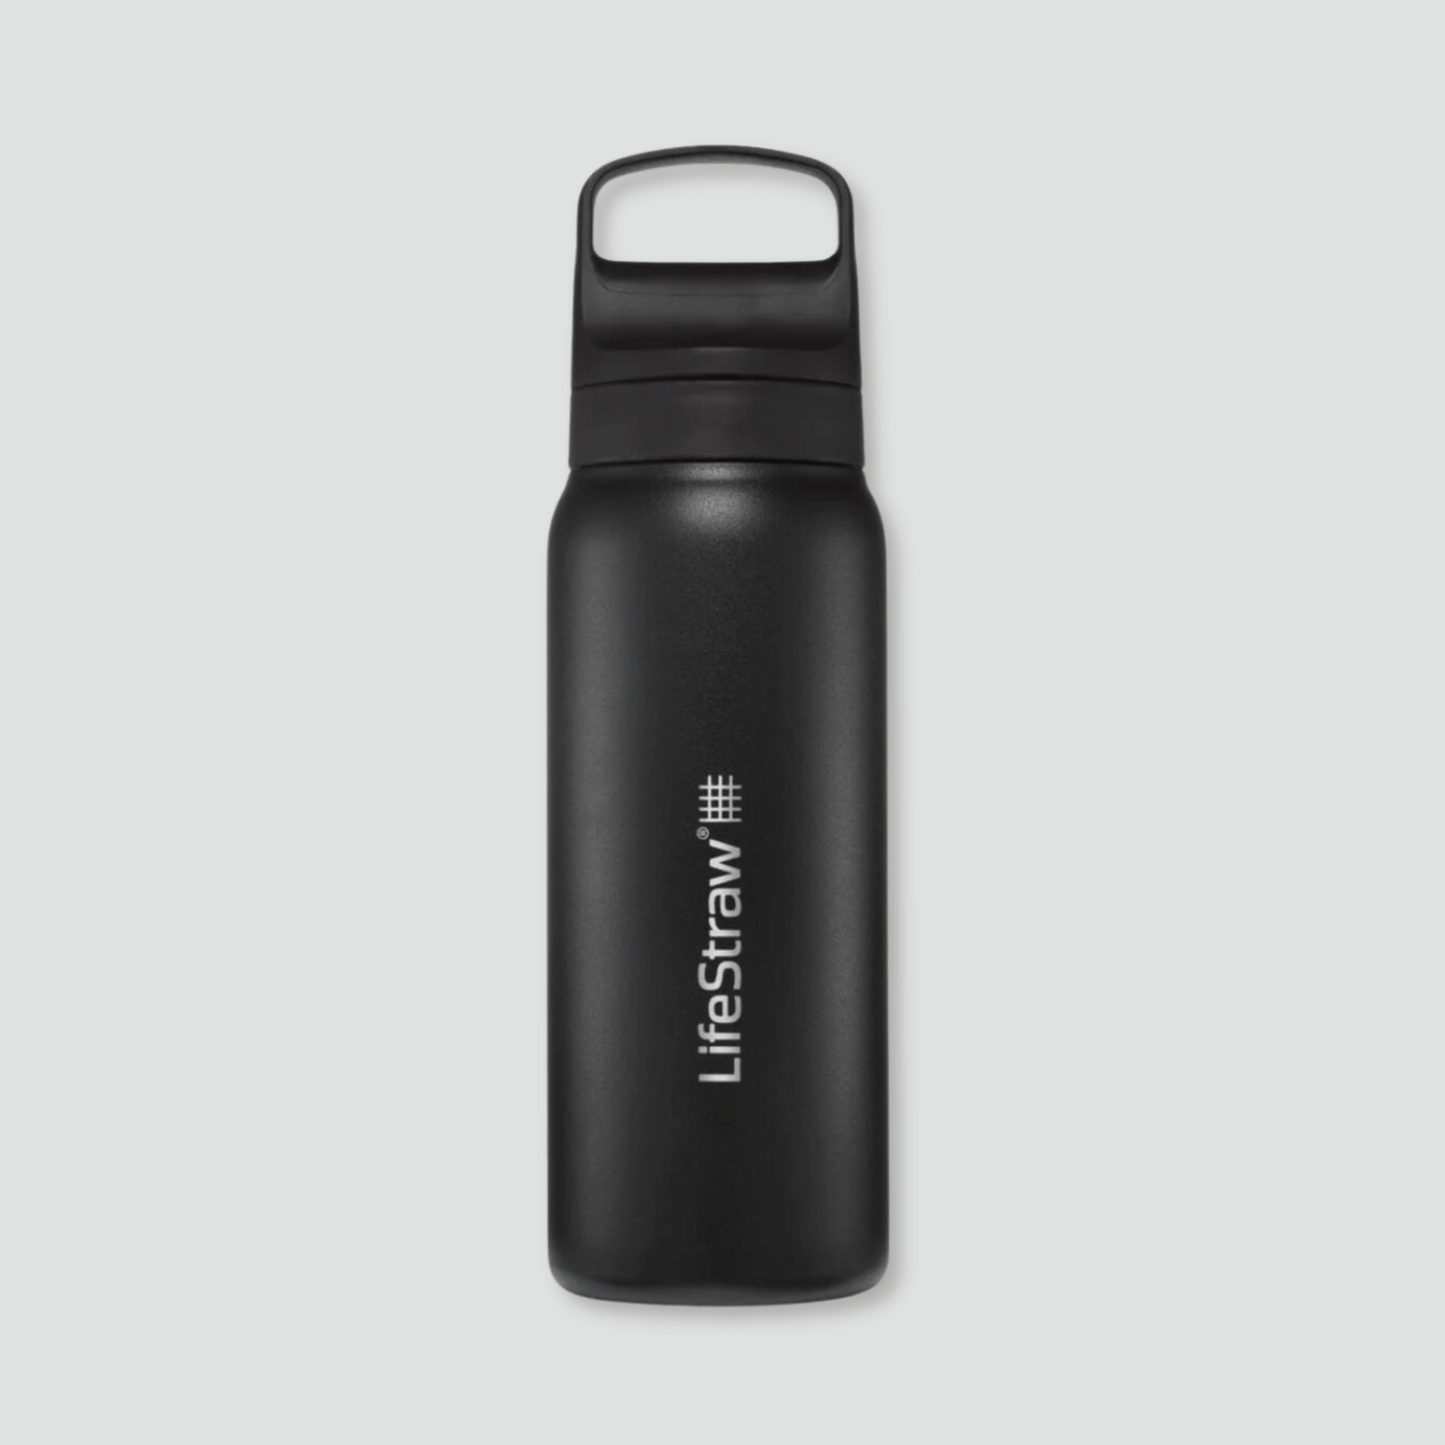 Black stainless steel water bottle with LifeStraw filter